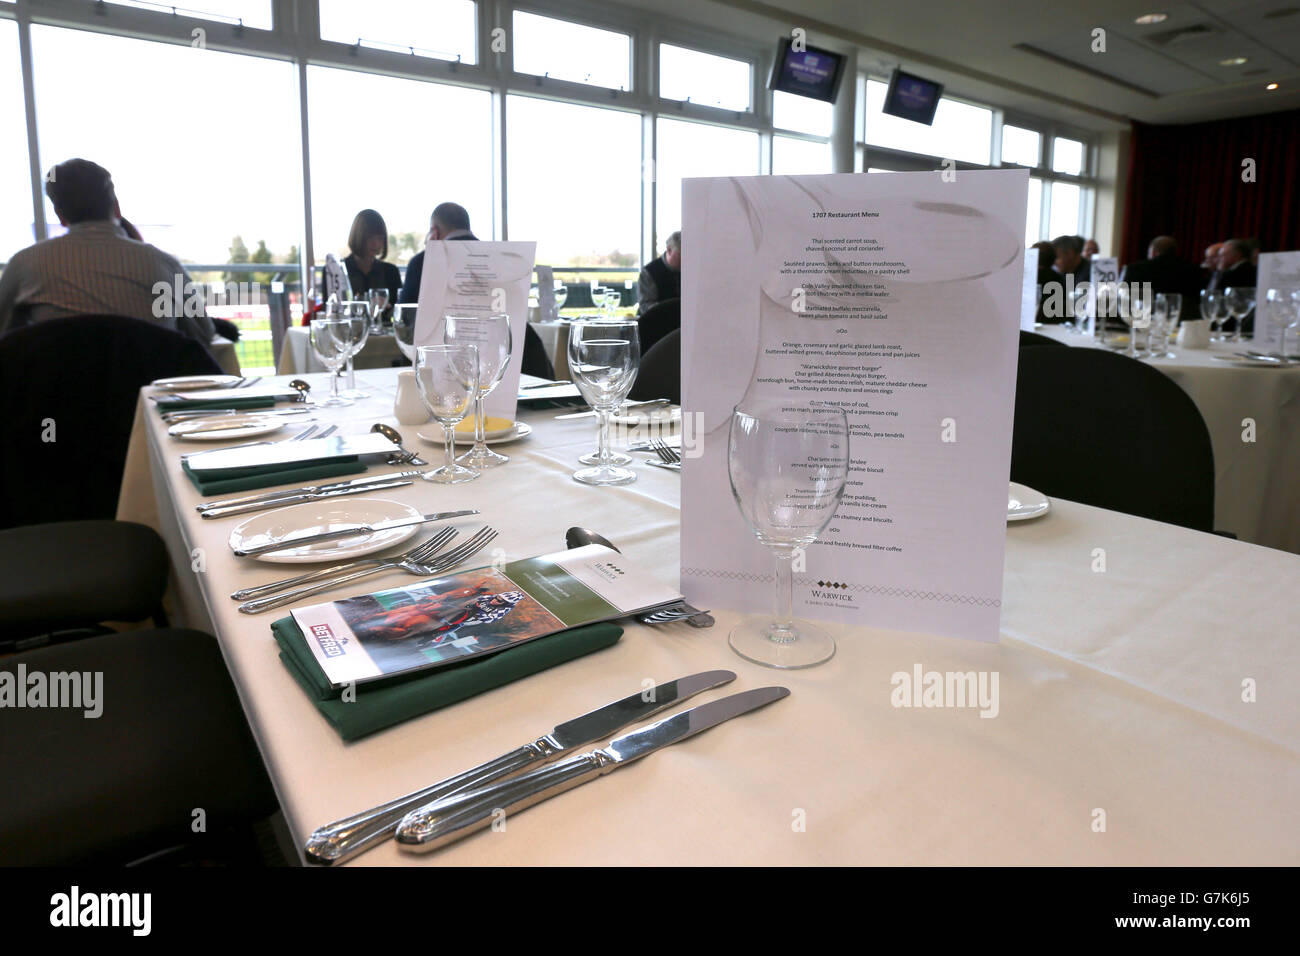 Horse Racing - Betfred Classic Chase Day - Warwick Racecourse. Hospitality laid out ready for guests on Betfred Classic Chase Day Stock Photo